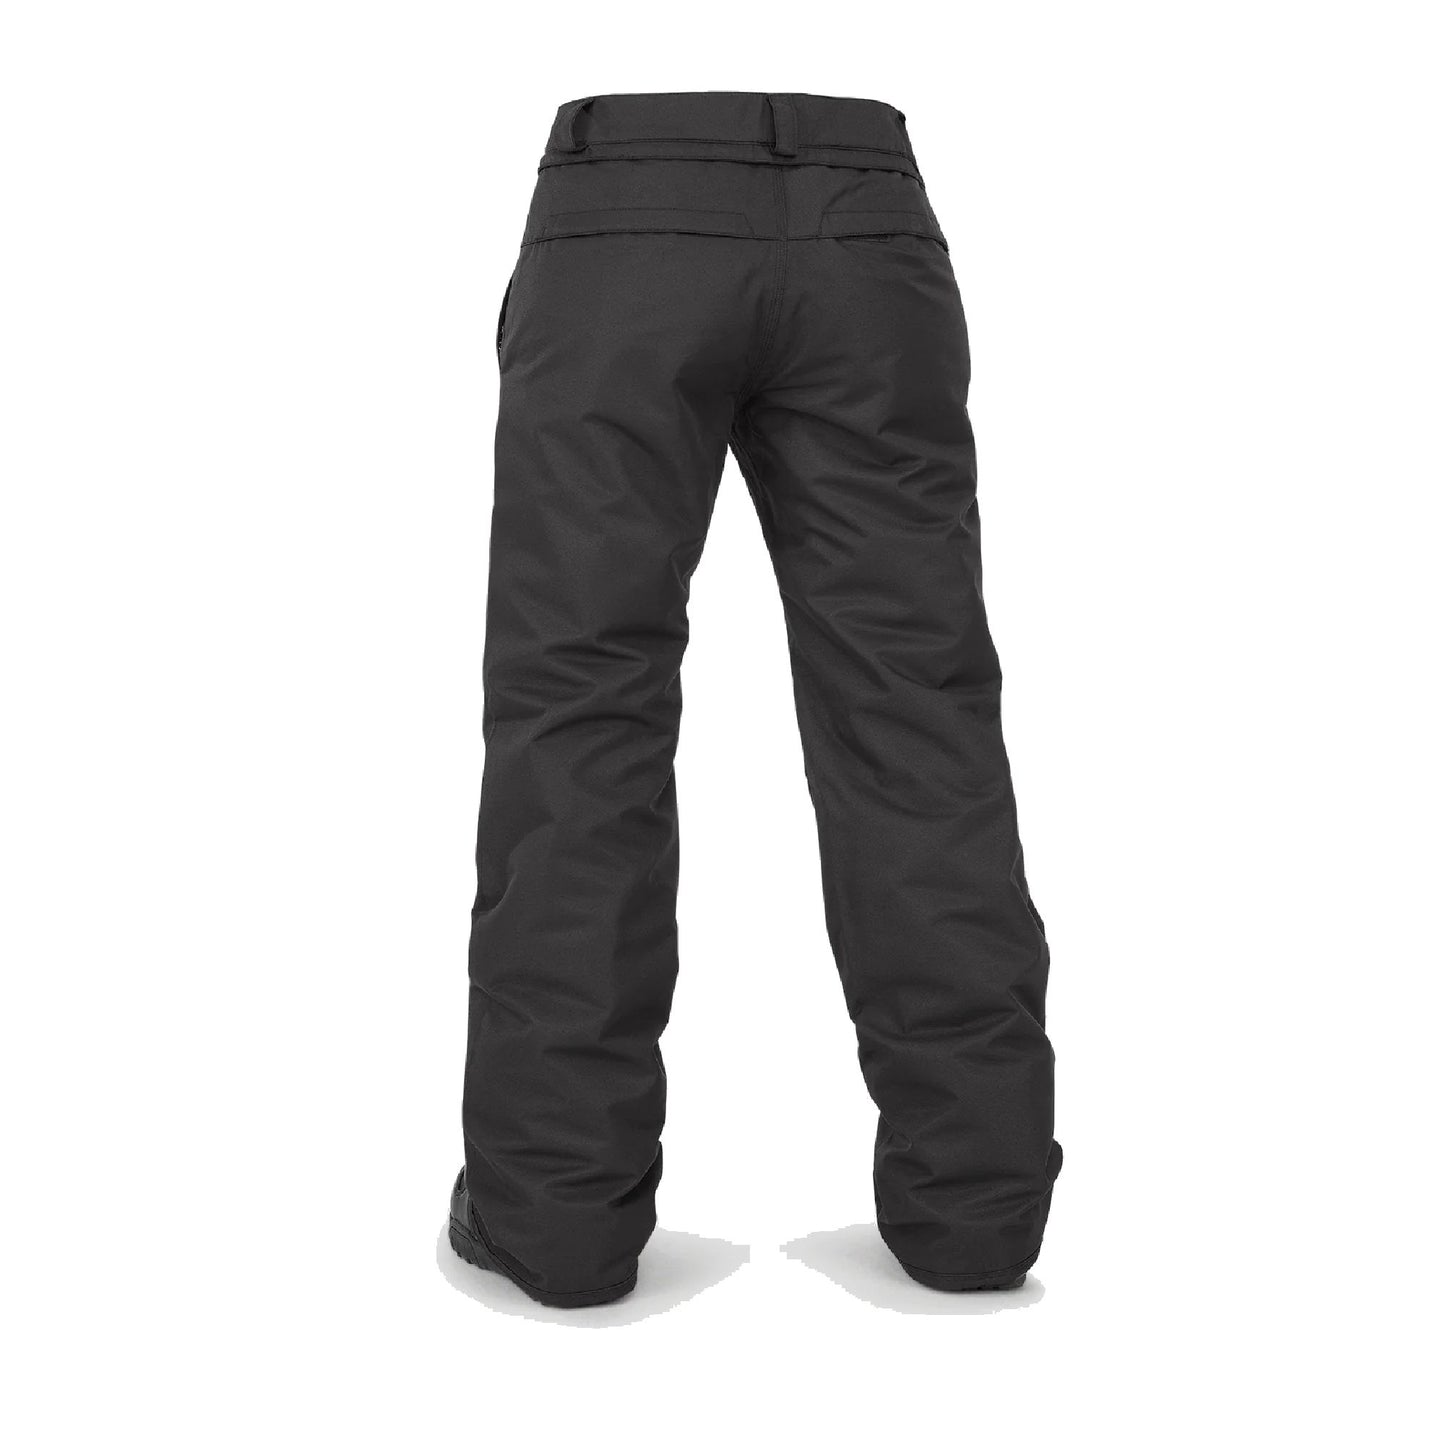 Volcom Women's Frochickie Insulated Pant Black Snow Pants